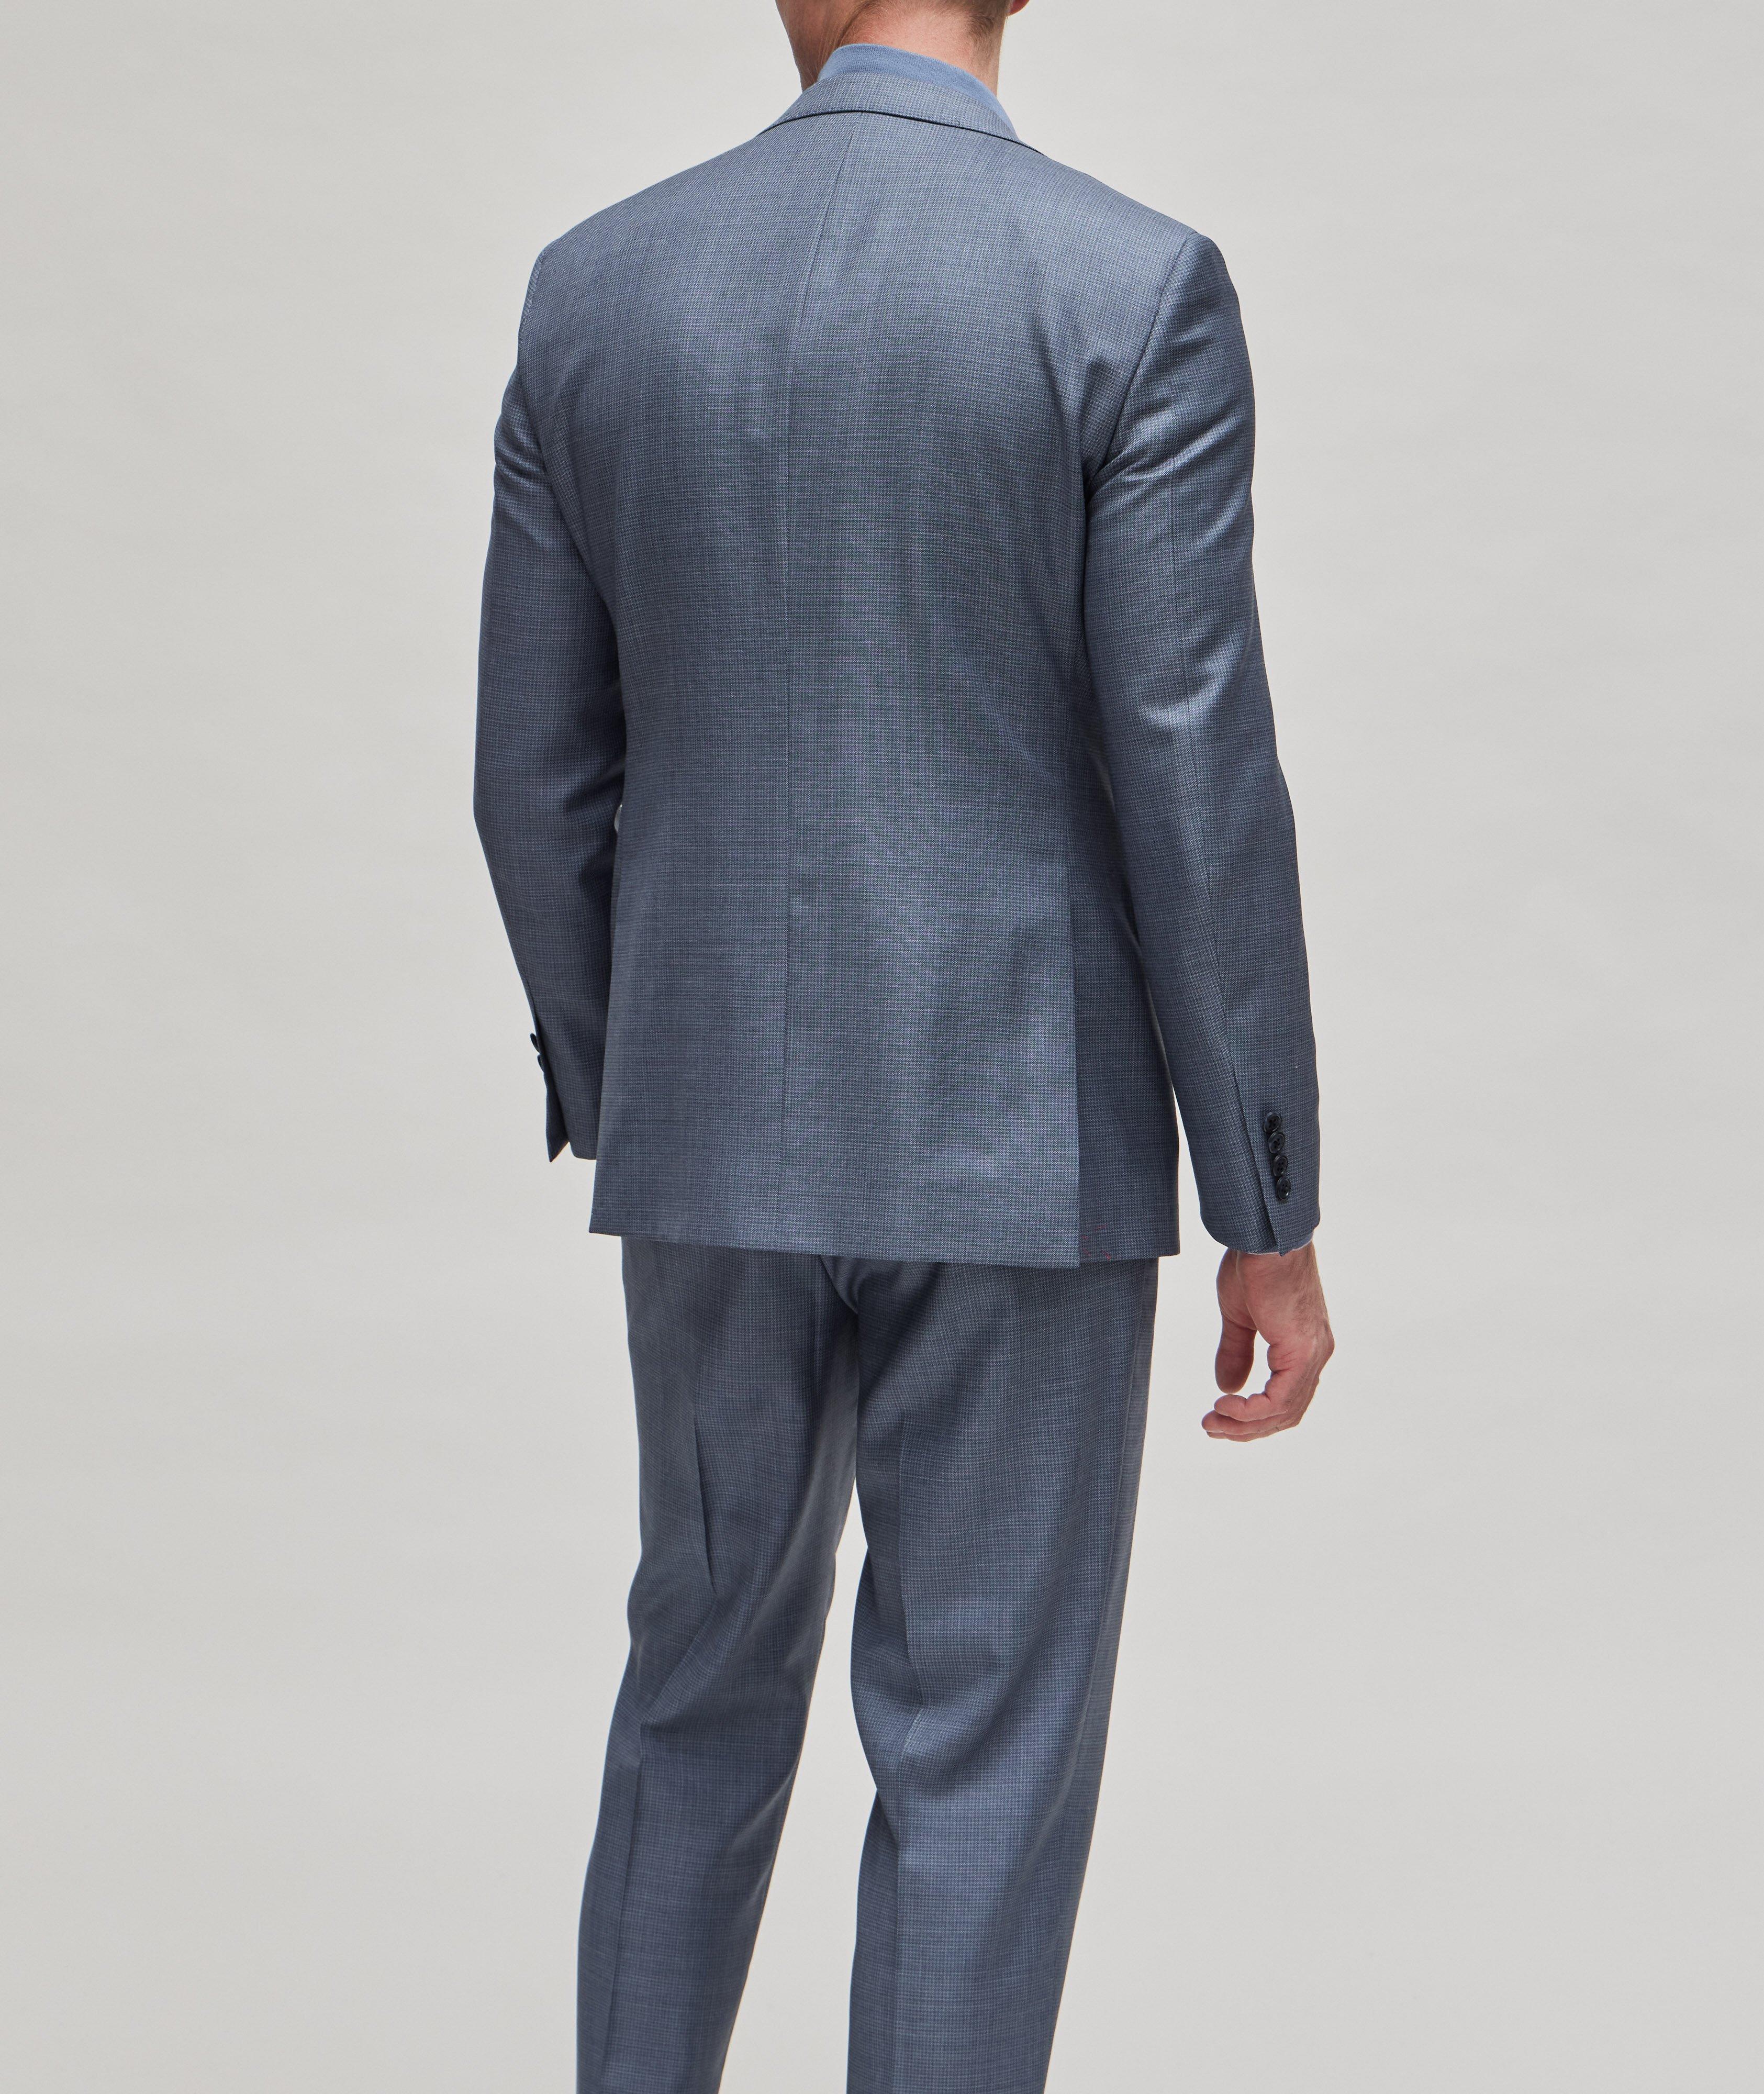 Cosmo Micro Check Wool Suit image 2